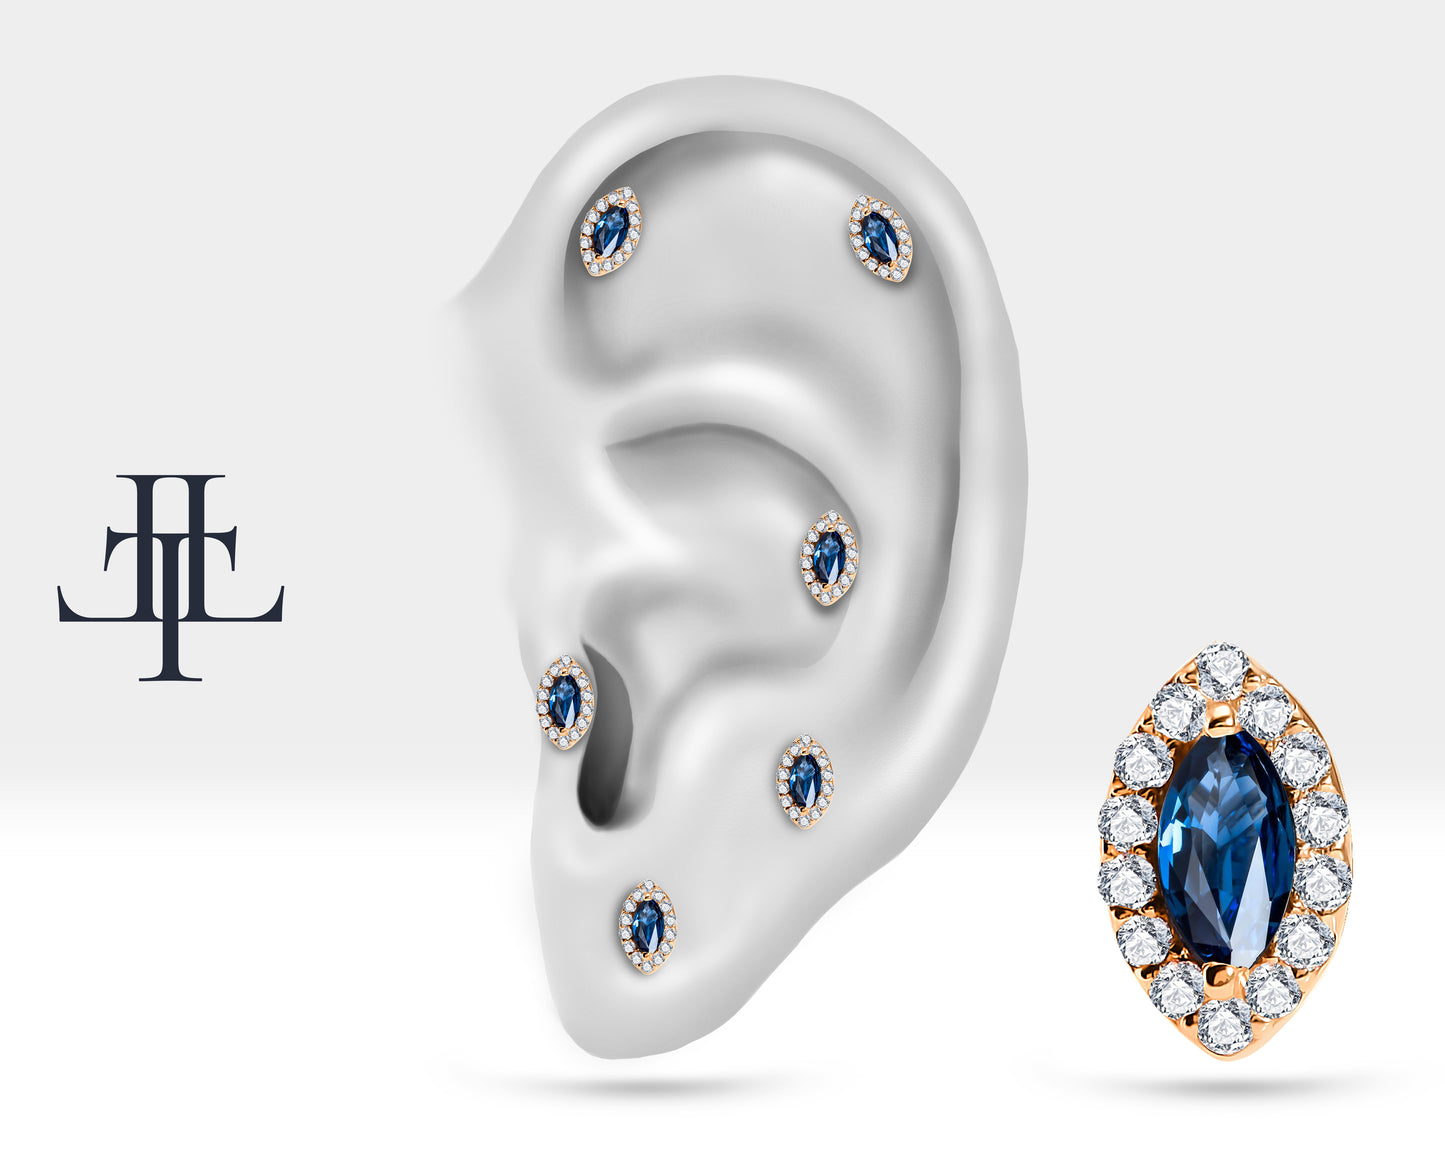 Cartilage Stud Sapphire Piercing,Marquise Sapphire Single Daith Stud Earring